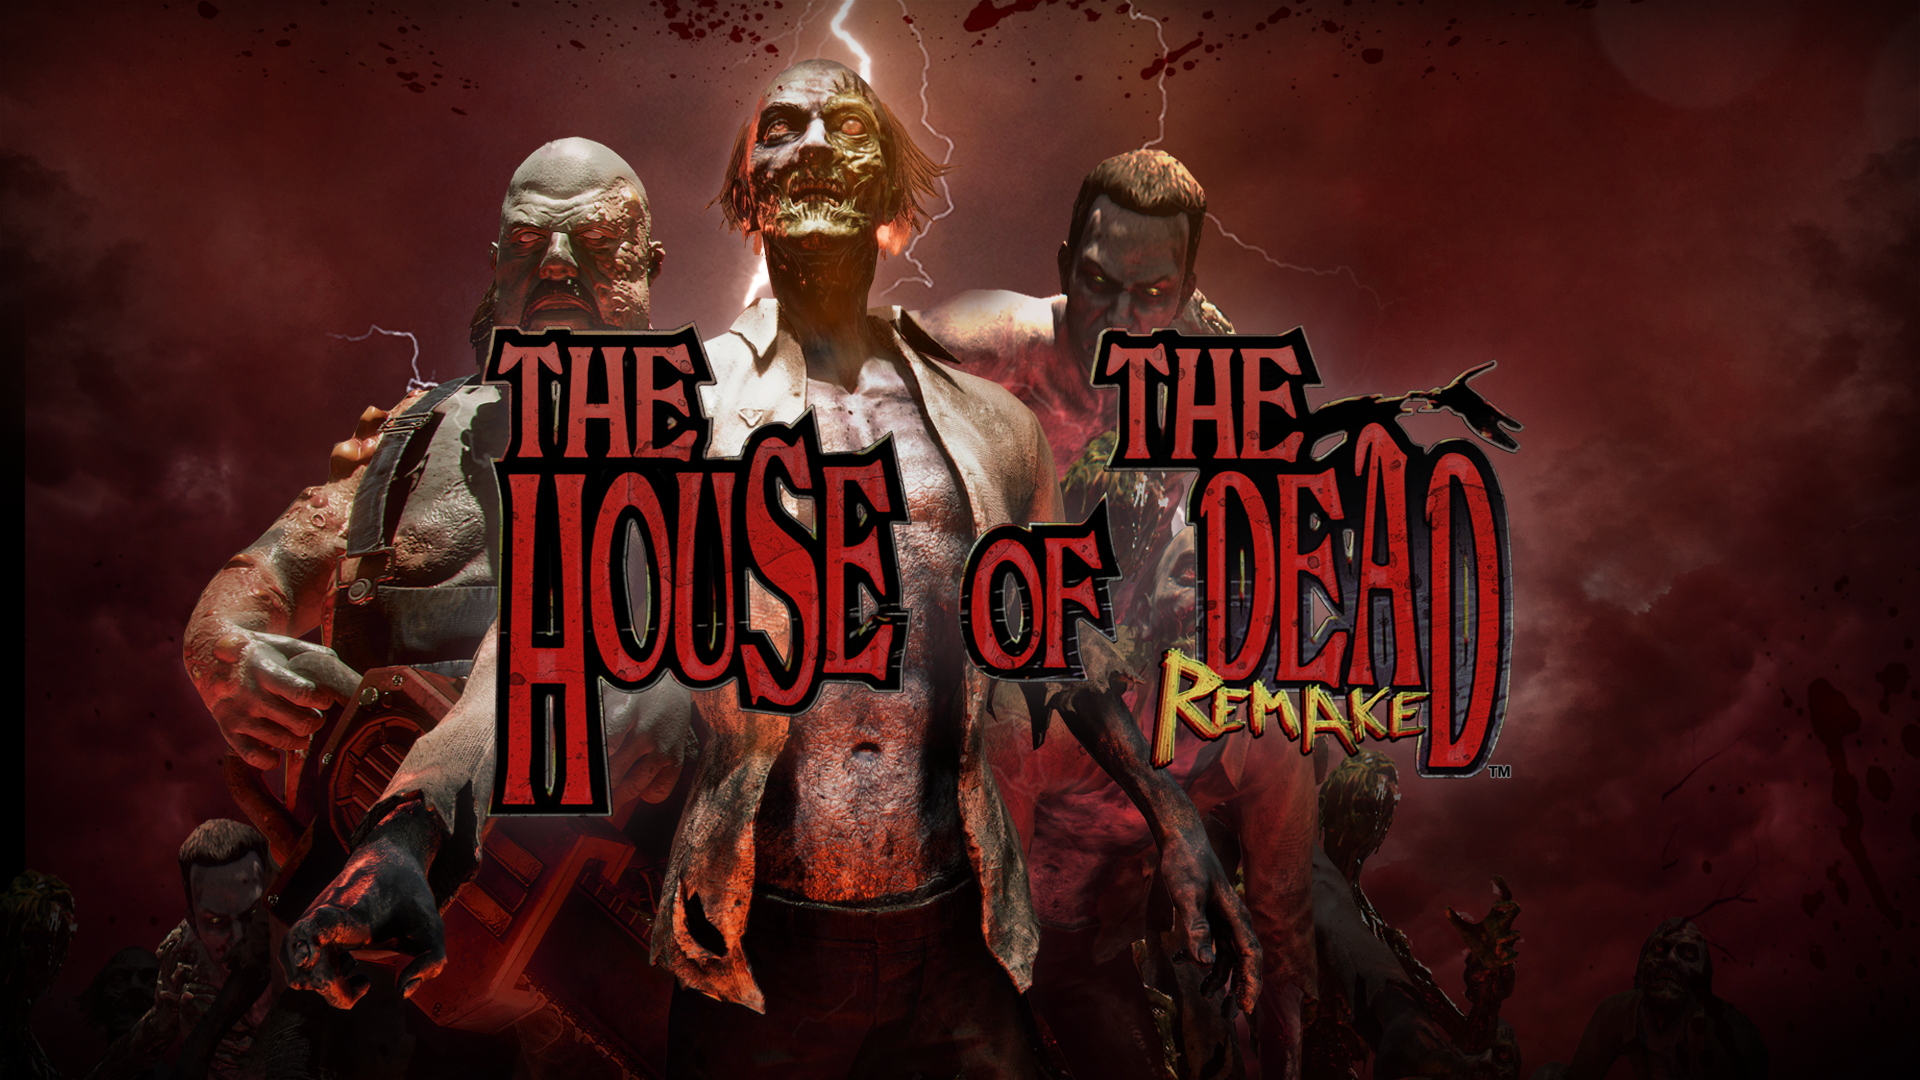 THE HOUSE OF THE DEAD Remake 